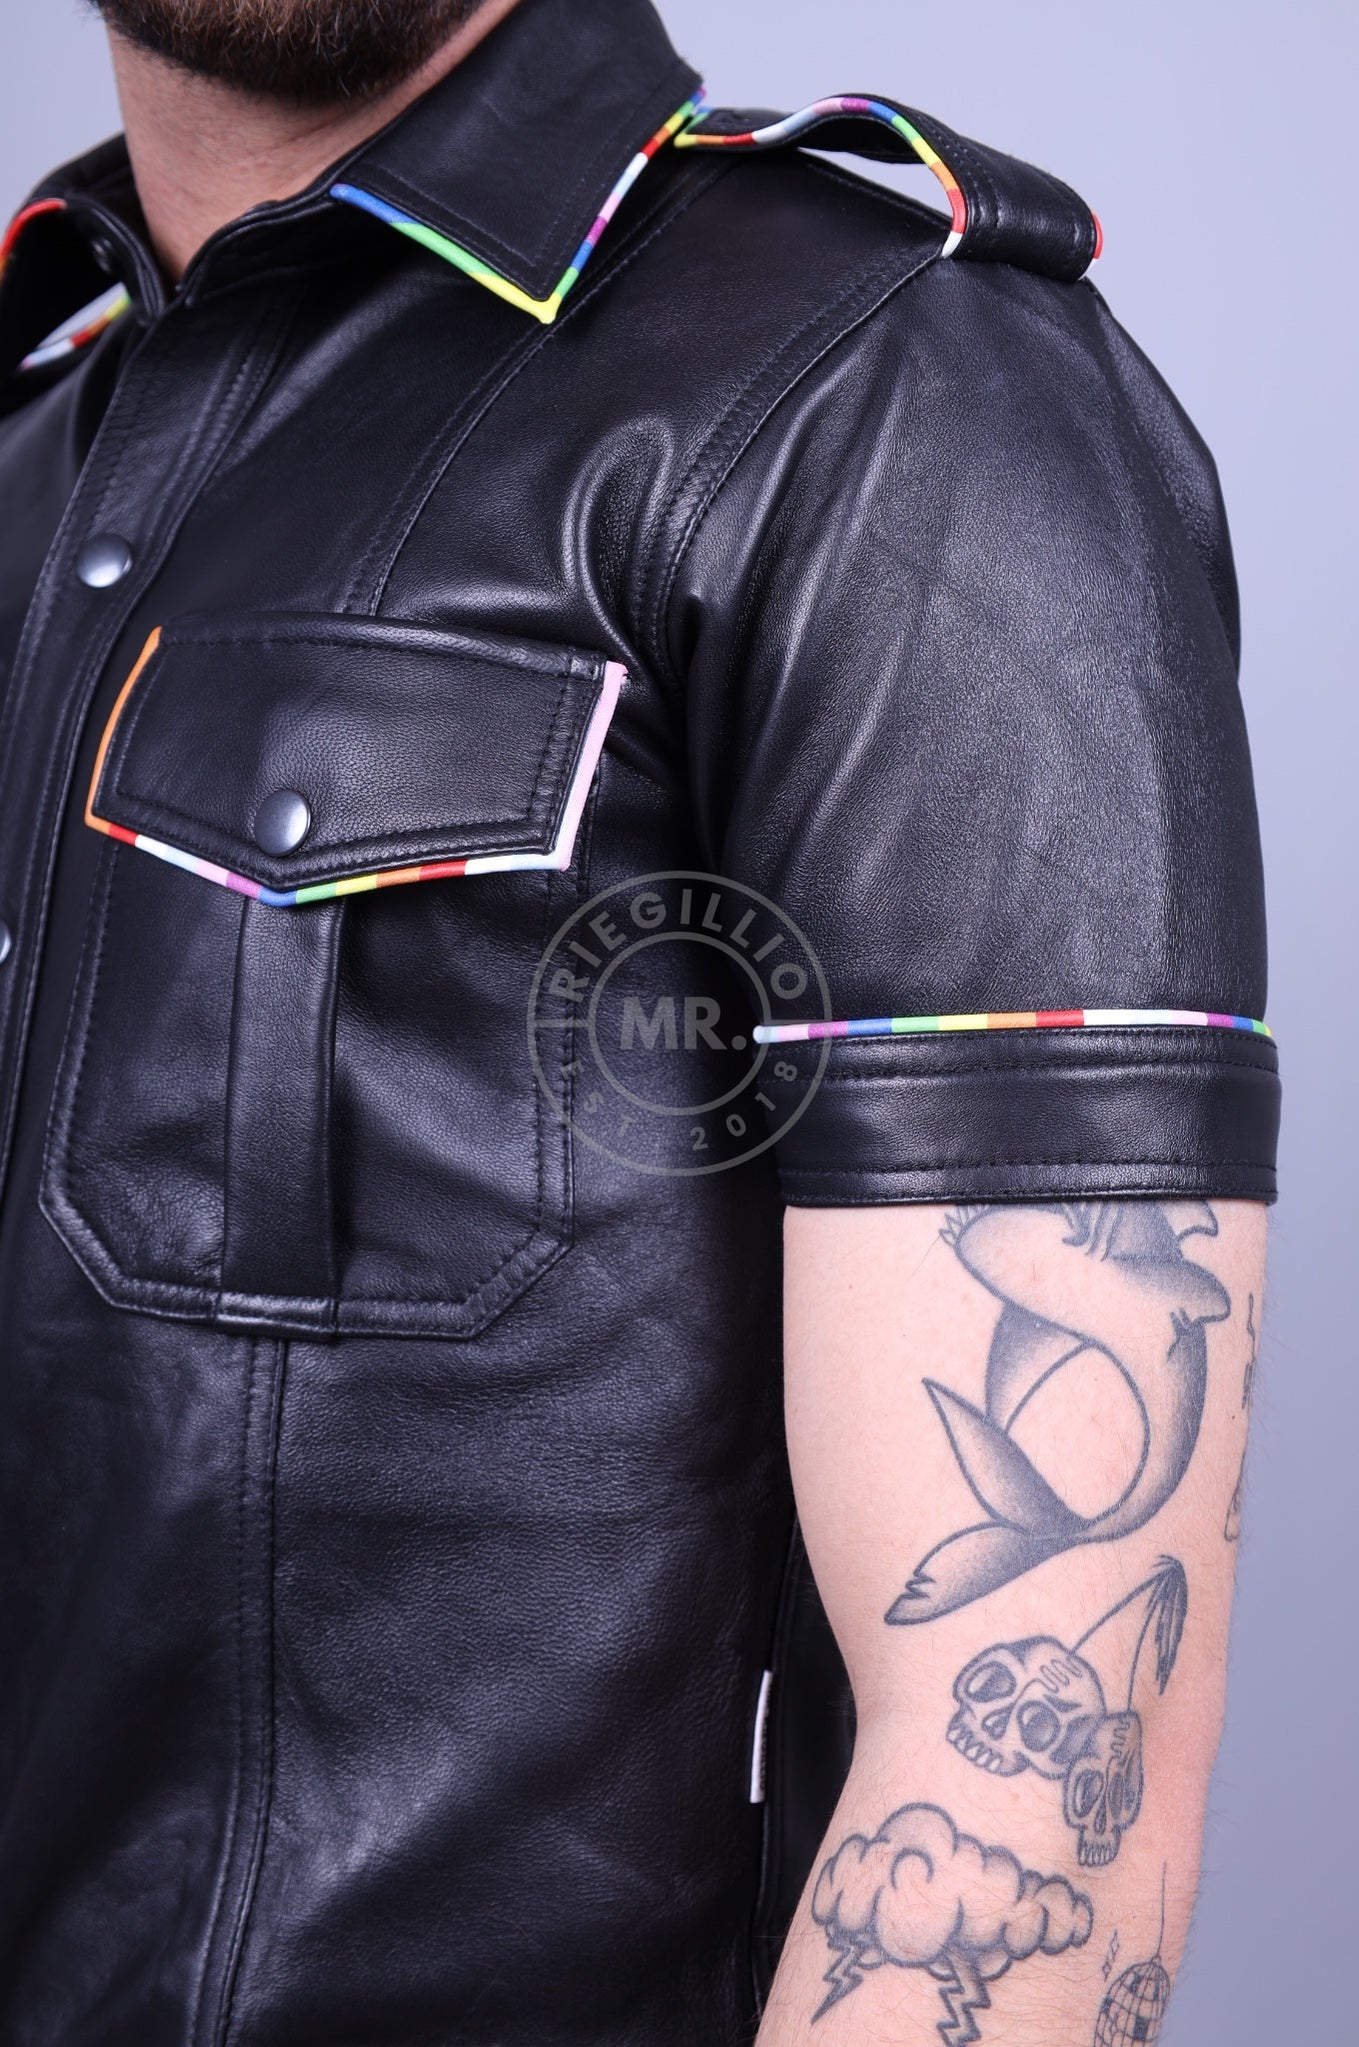 Leather Tank Top - Black Piping by MR. Riegillio